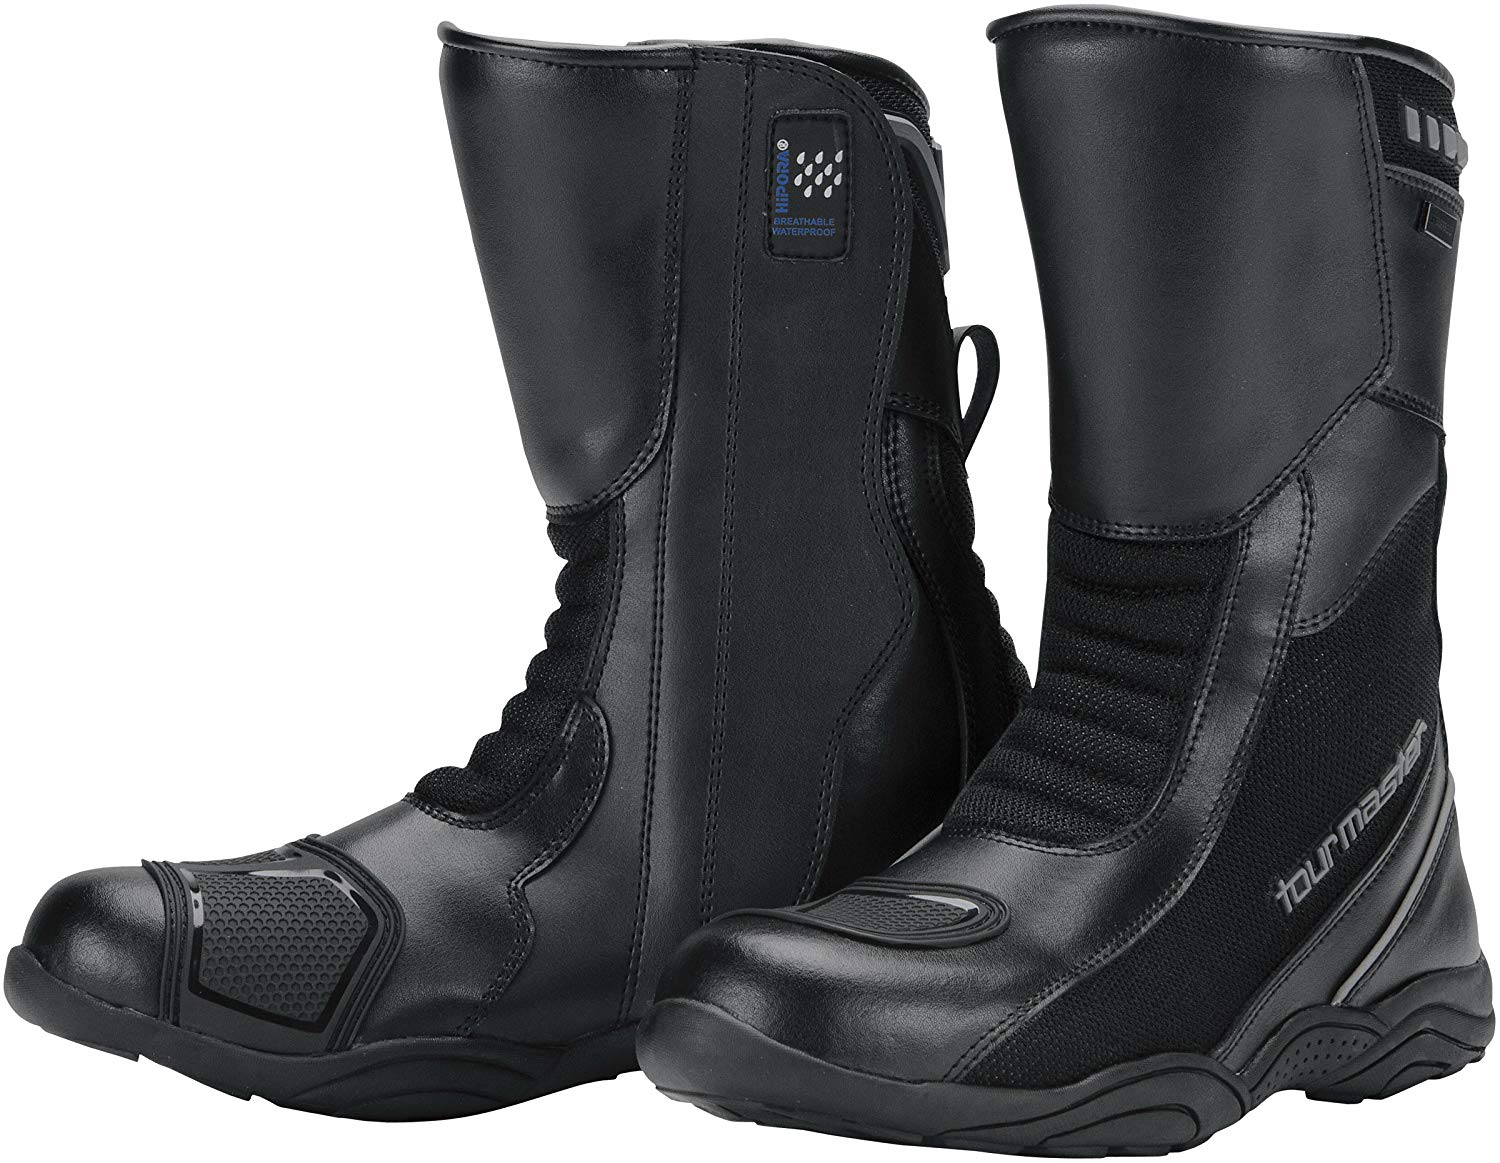 Tour Master Solution WP Air Road Boots - 10/Black